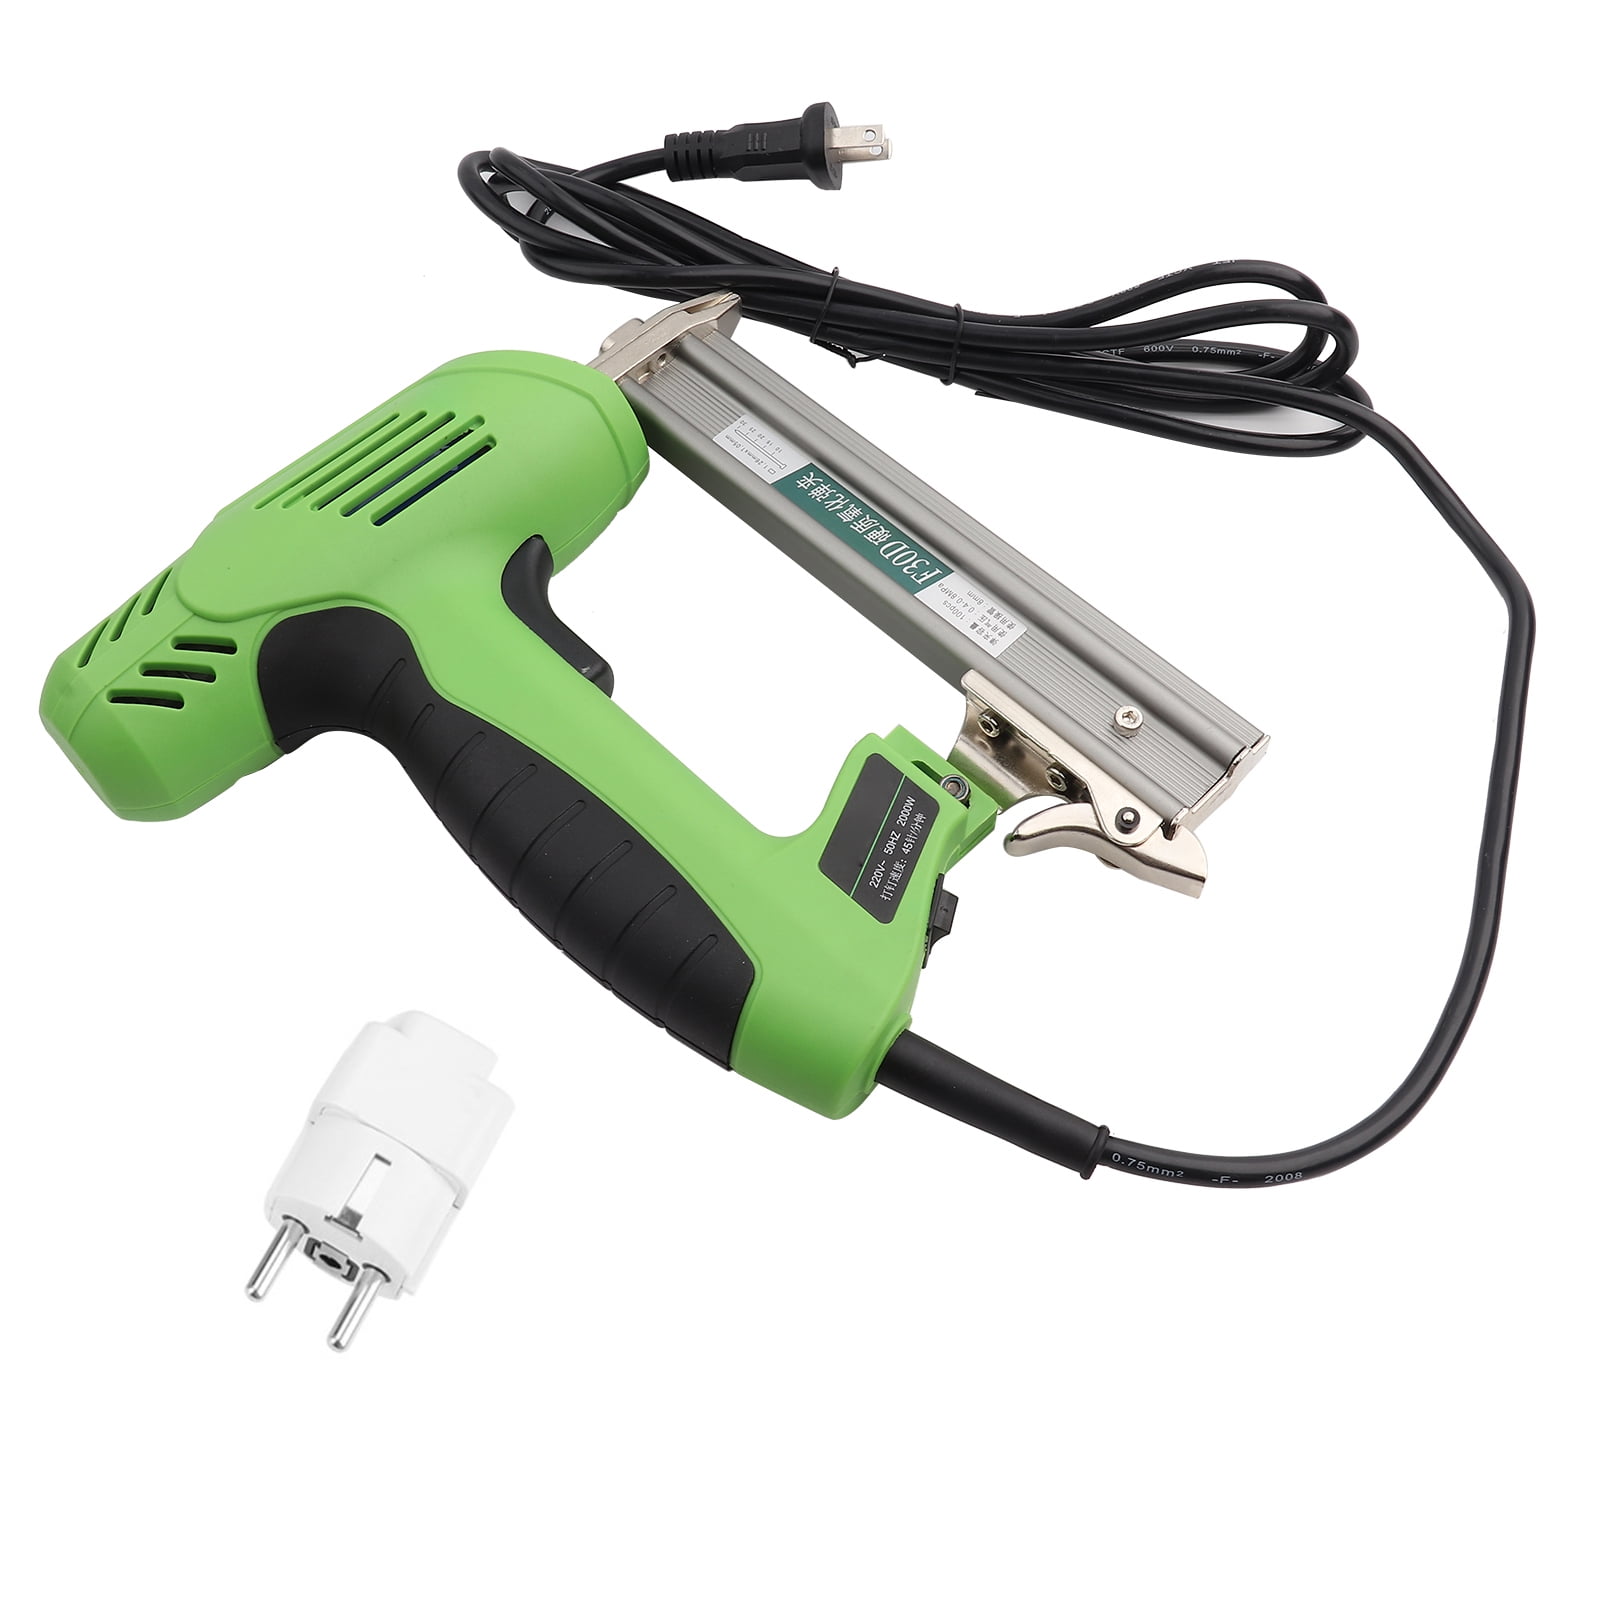 High Strength 10mm High Speed Straight Pneumatic Hand Drill Industrial Grade Pneumatic Drill Hand Tool Multifunction and Ergonomic 